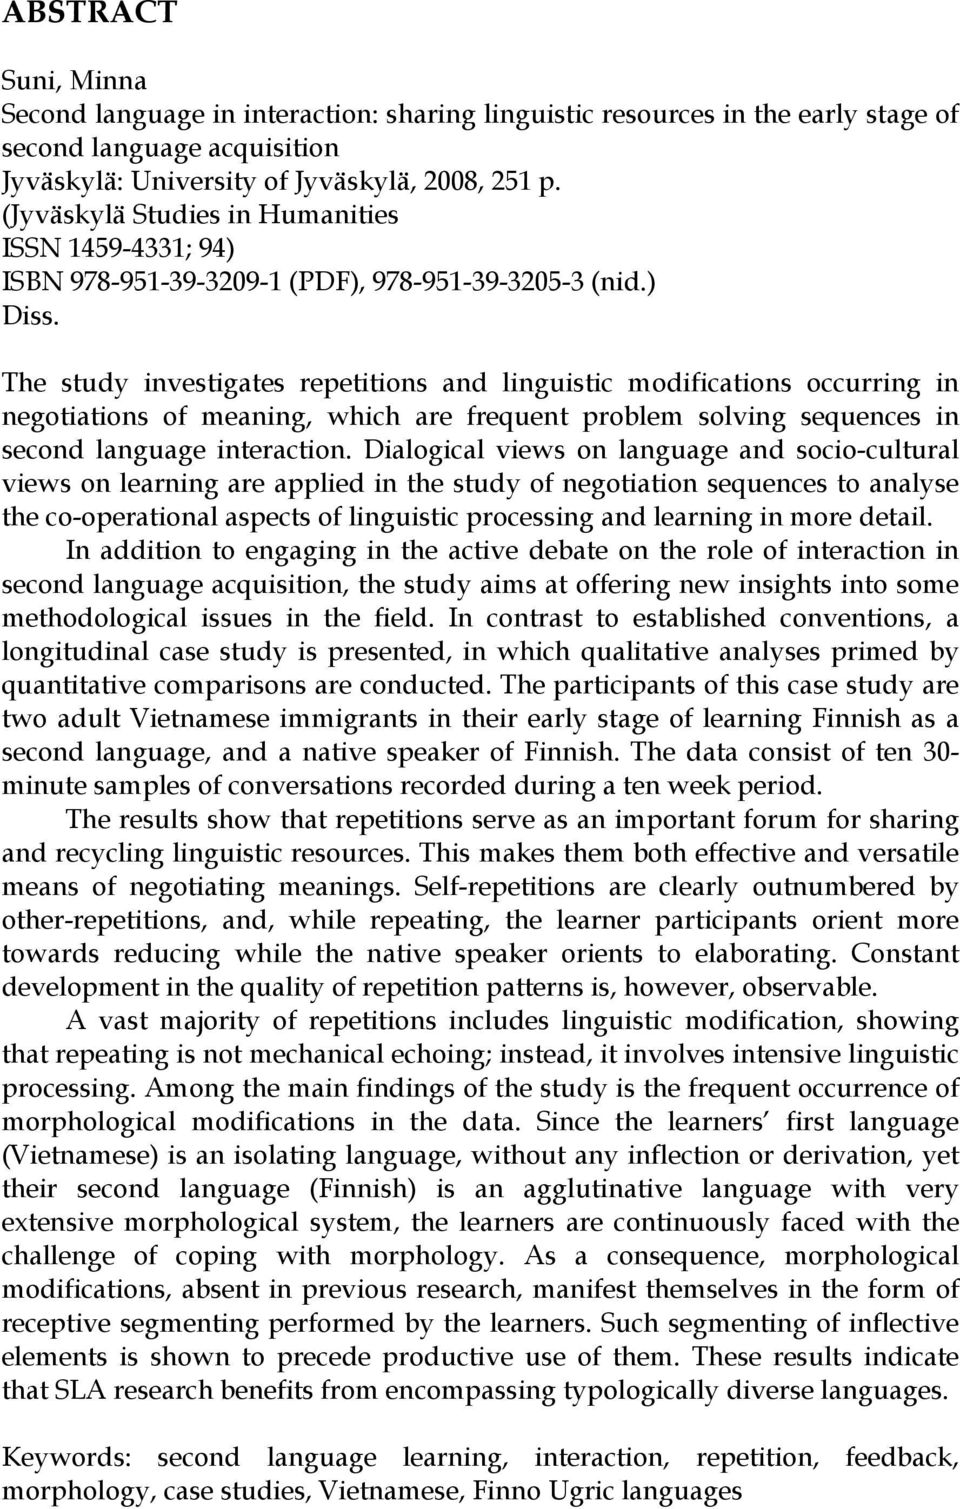 The study investigates repetitions and linguistic modifications occurring in negotiations of meaning, which are frequent problem solving sequences in second language interaction.